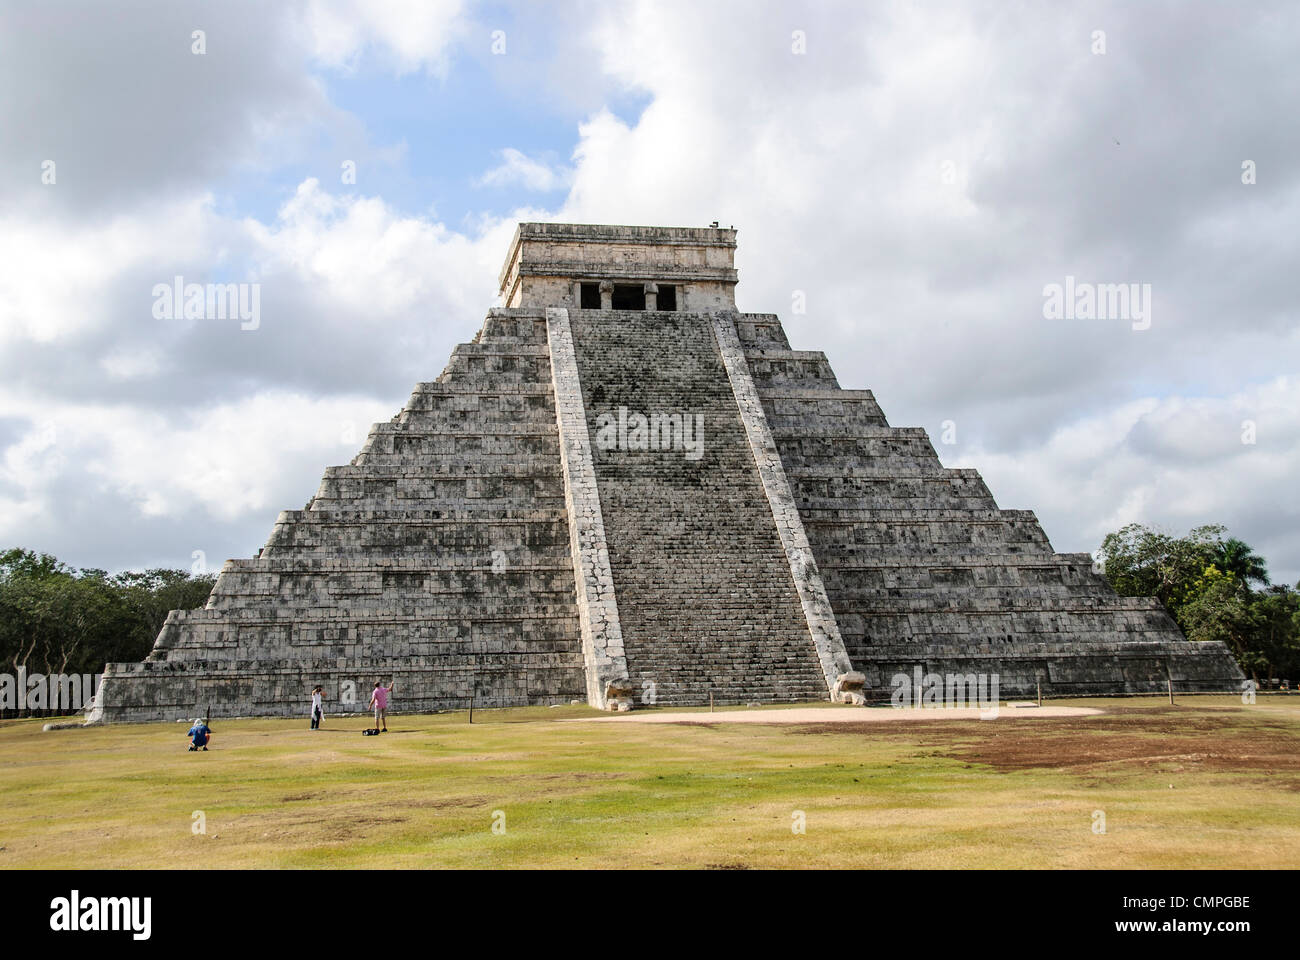 CHICHEN ITZA, Mexico - Tourists standing in front of the Temple of Kukulkan (El Castillo) at Chichen Itza Archeological Zone, ruins of a major Maya civilization city in the heart of Mexico's Yucatan Peninsula. Stock Photo